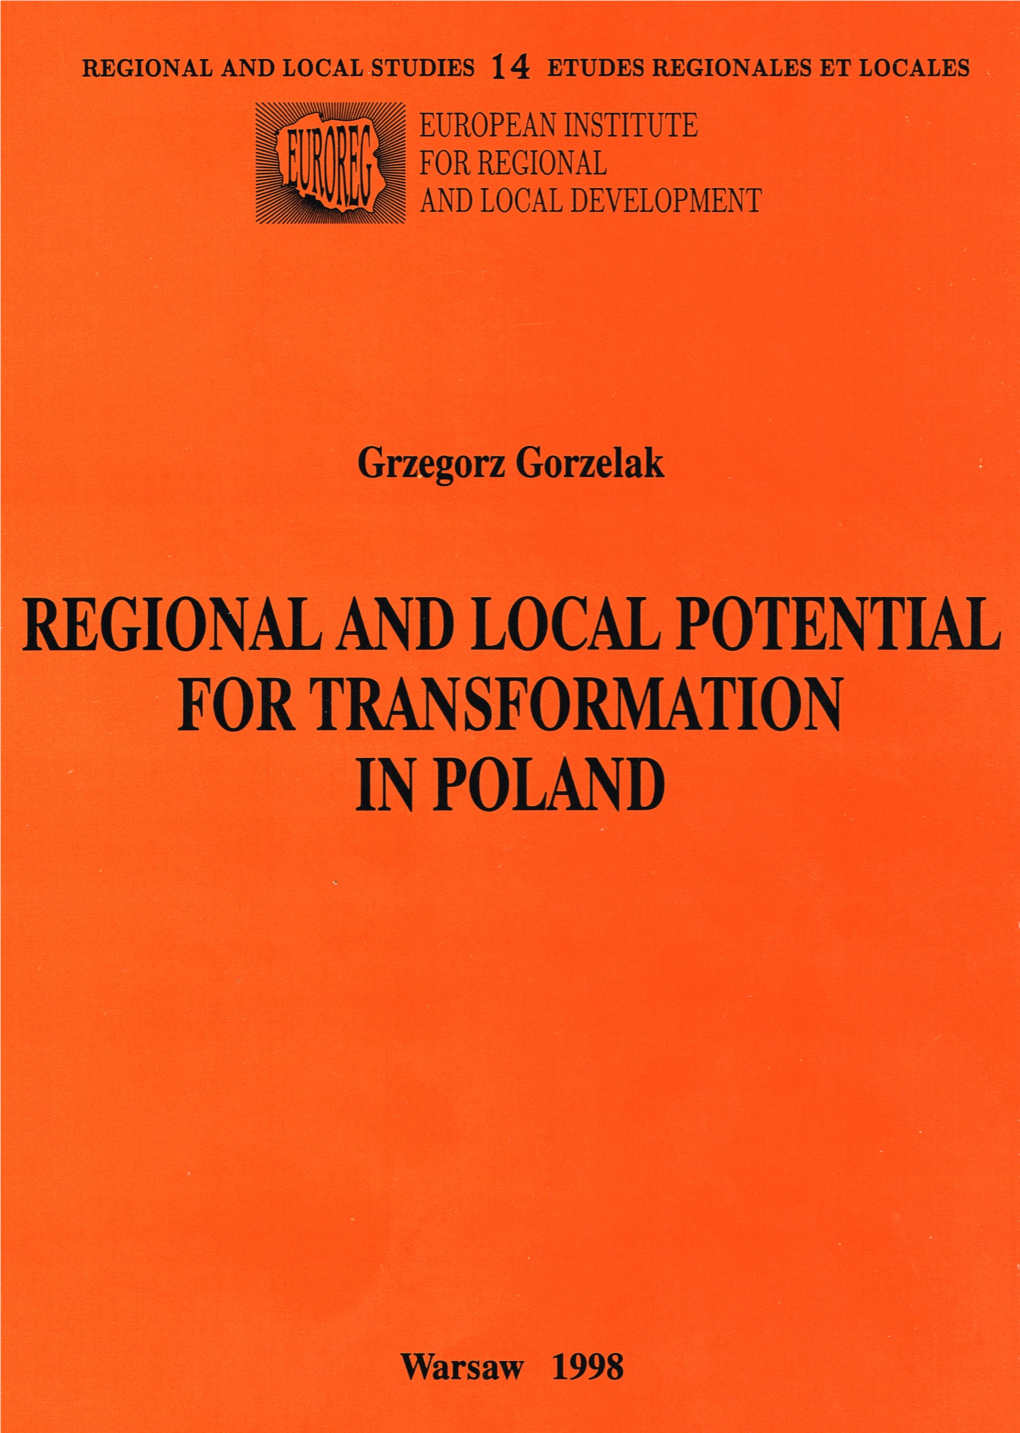 Regional and Local Potential for Transformation in Poland